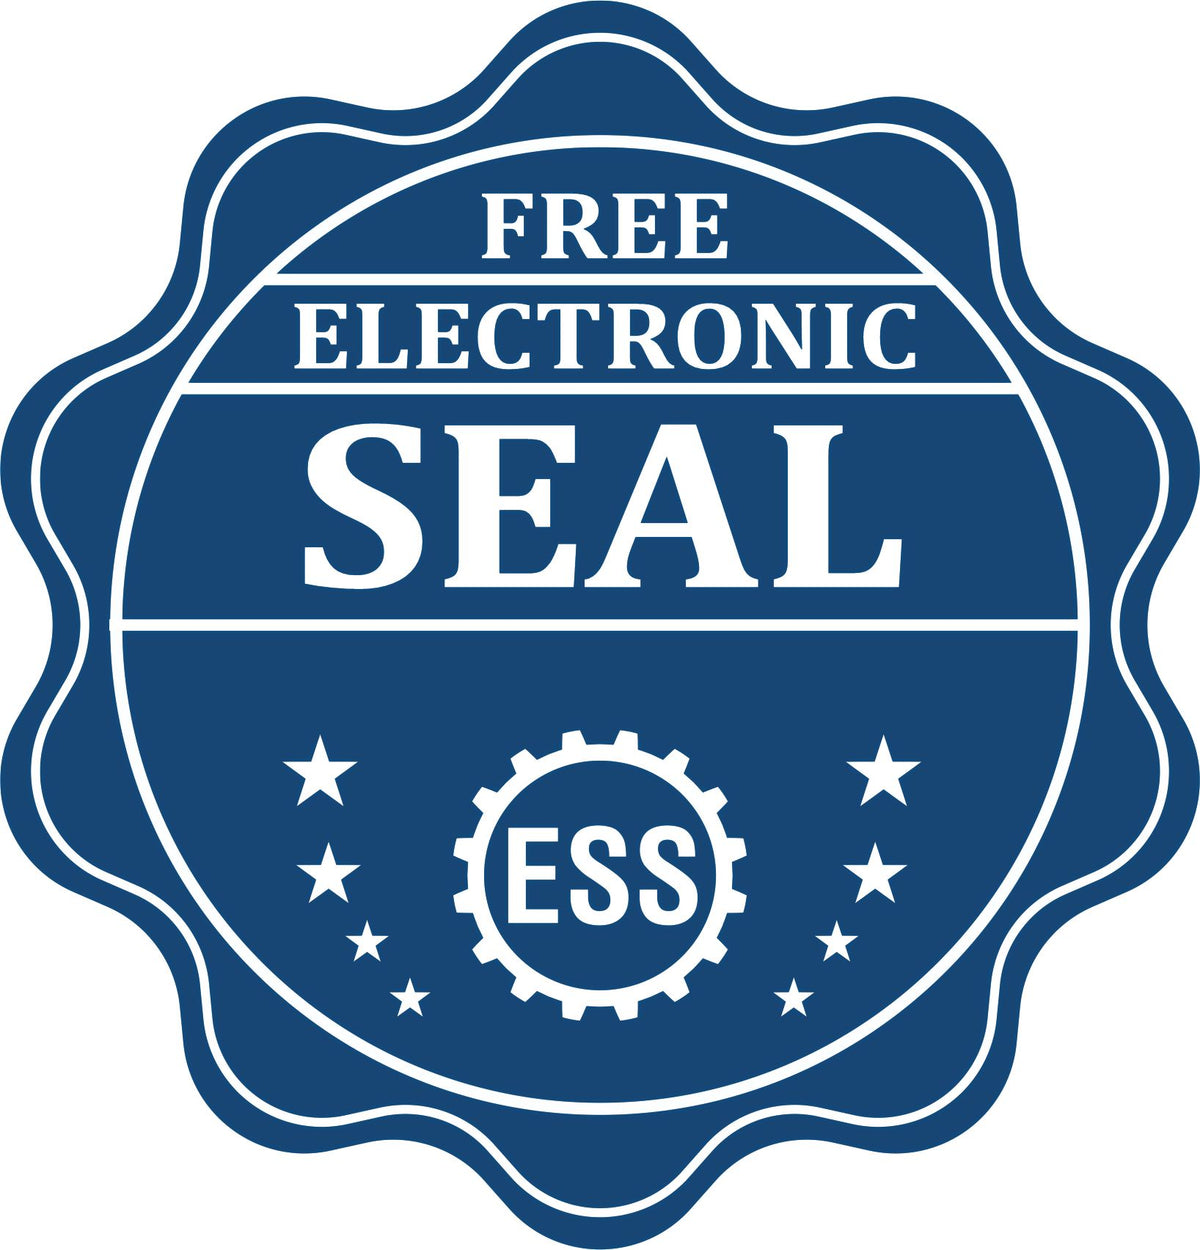 A badge showing a free electronic seal for the Gift South Carolina Geologist Seal with stars and the ESS gear on the emblem.